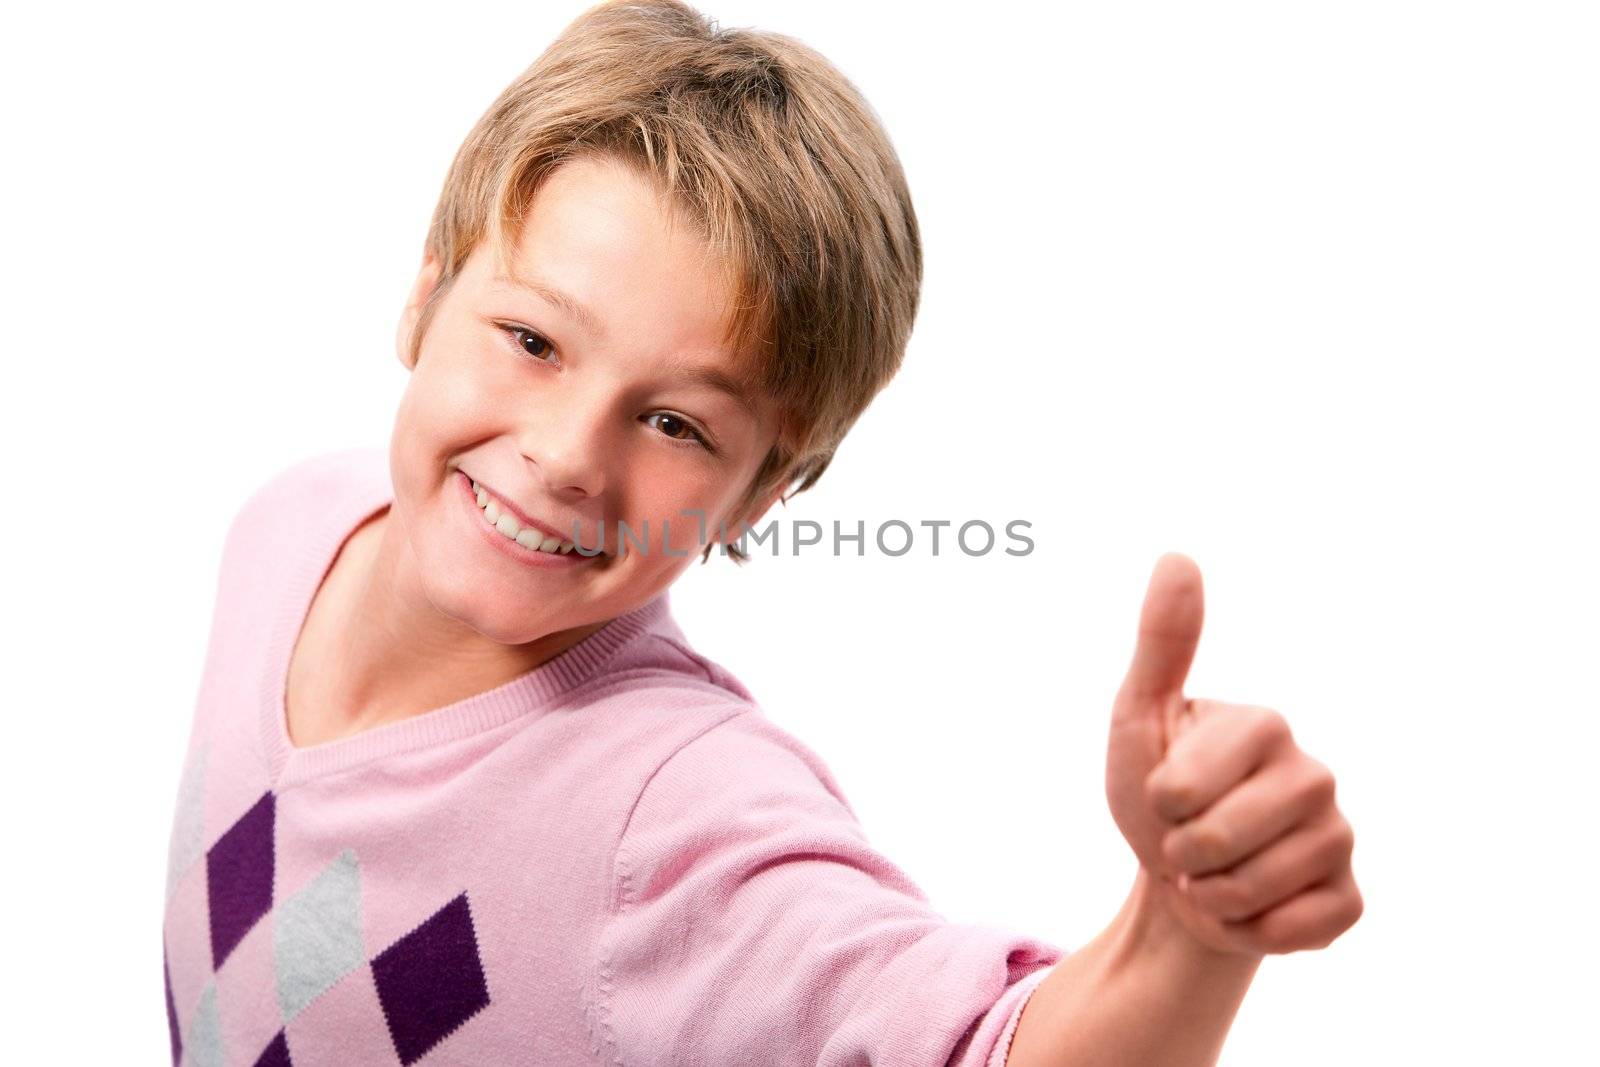 Portrait of young boy showing thumbs up by karelnoppe